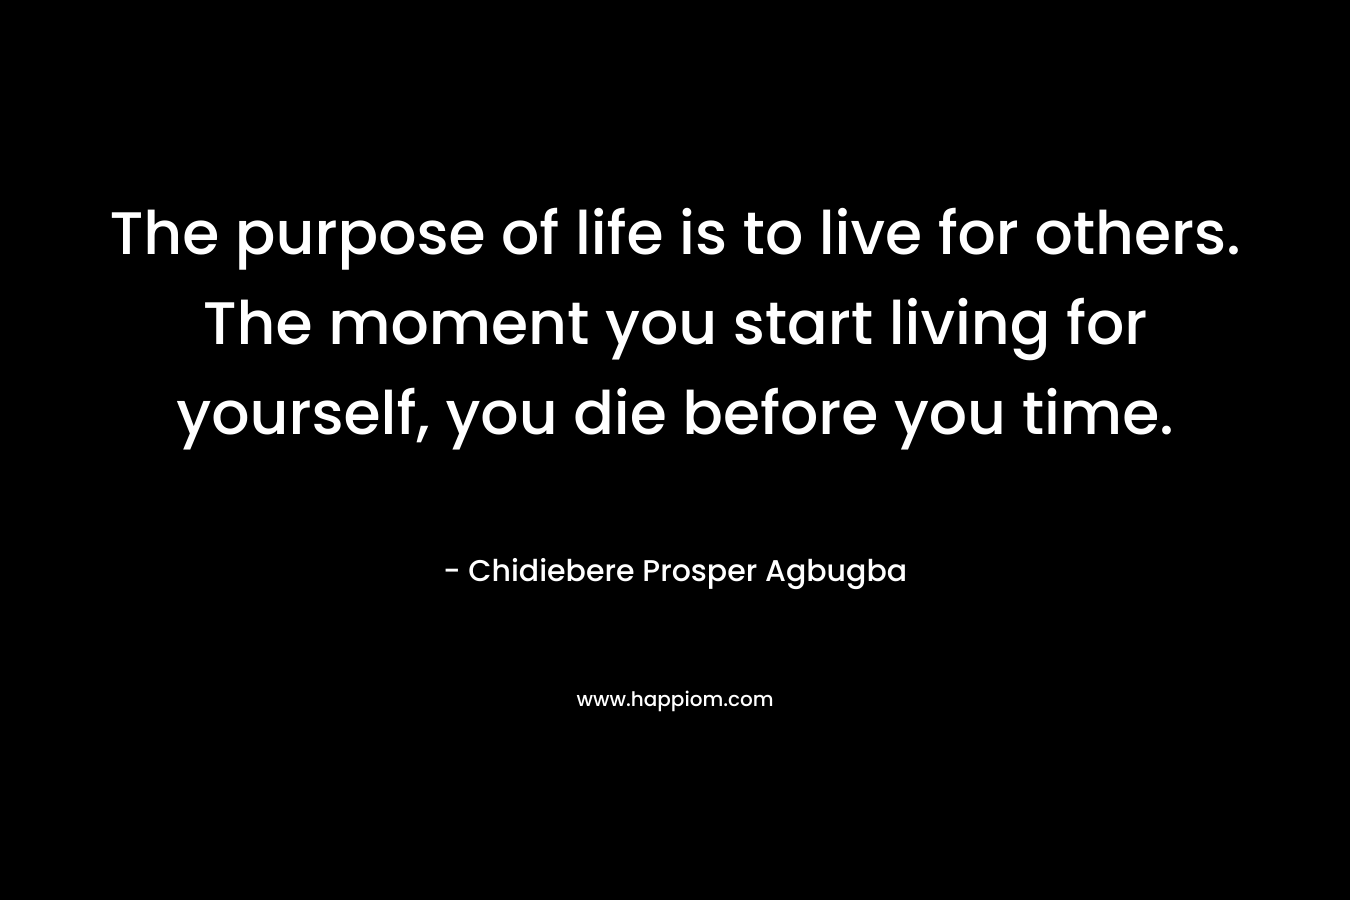 The purpose of life is to live for others. The moment you start living for yourself, you die before you time.